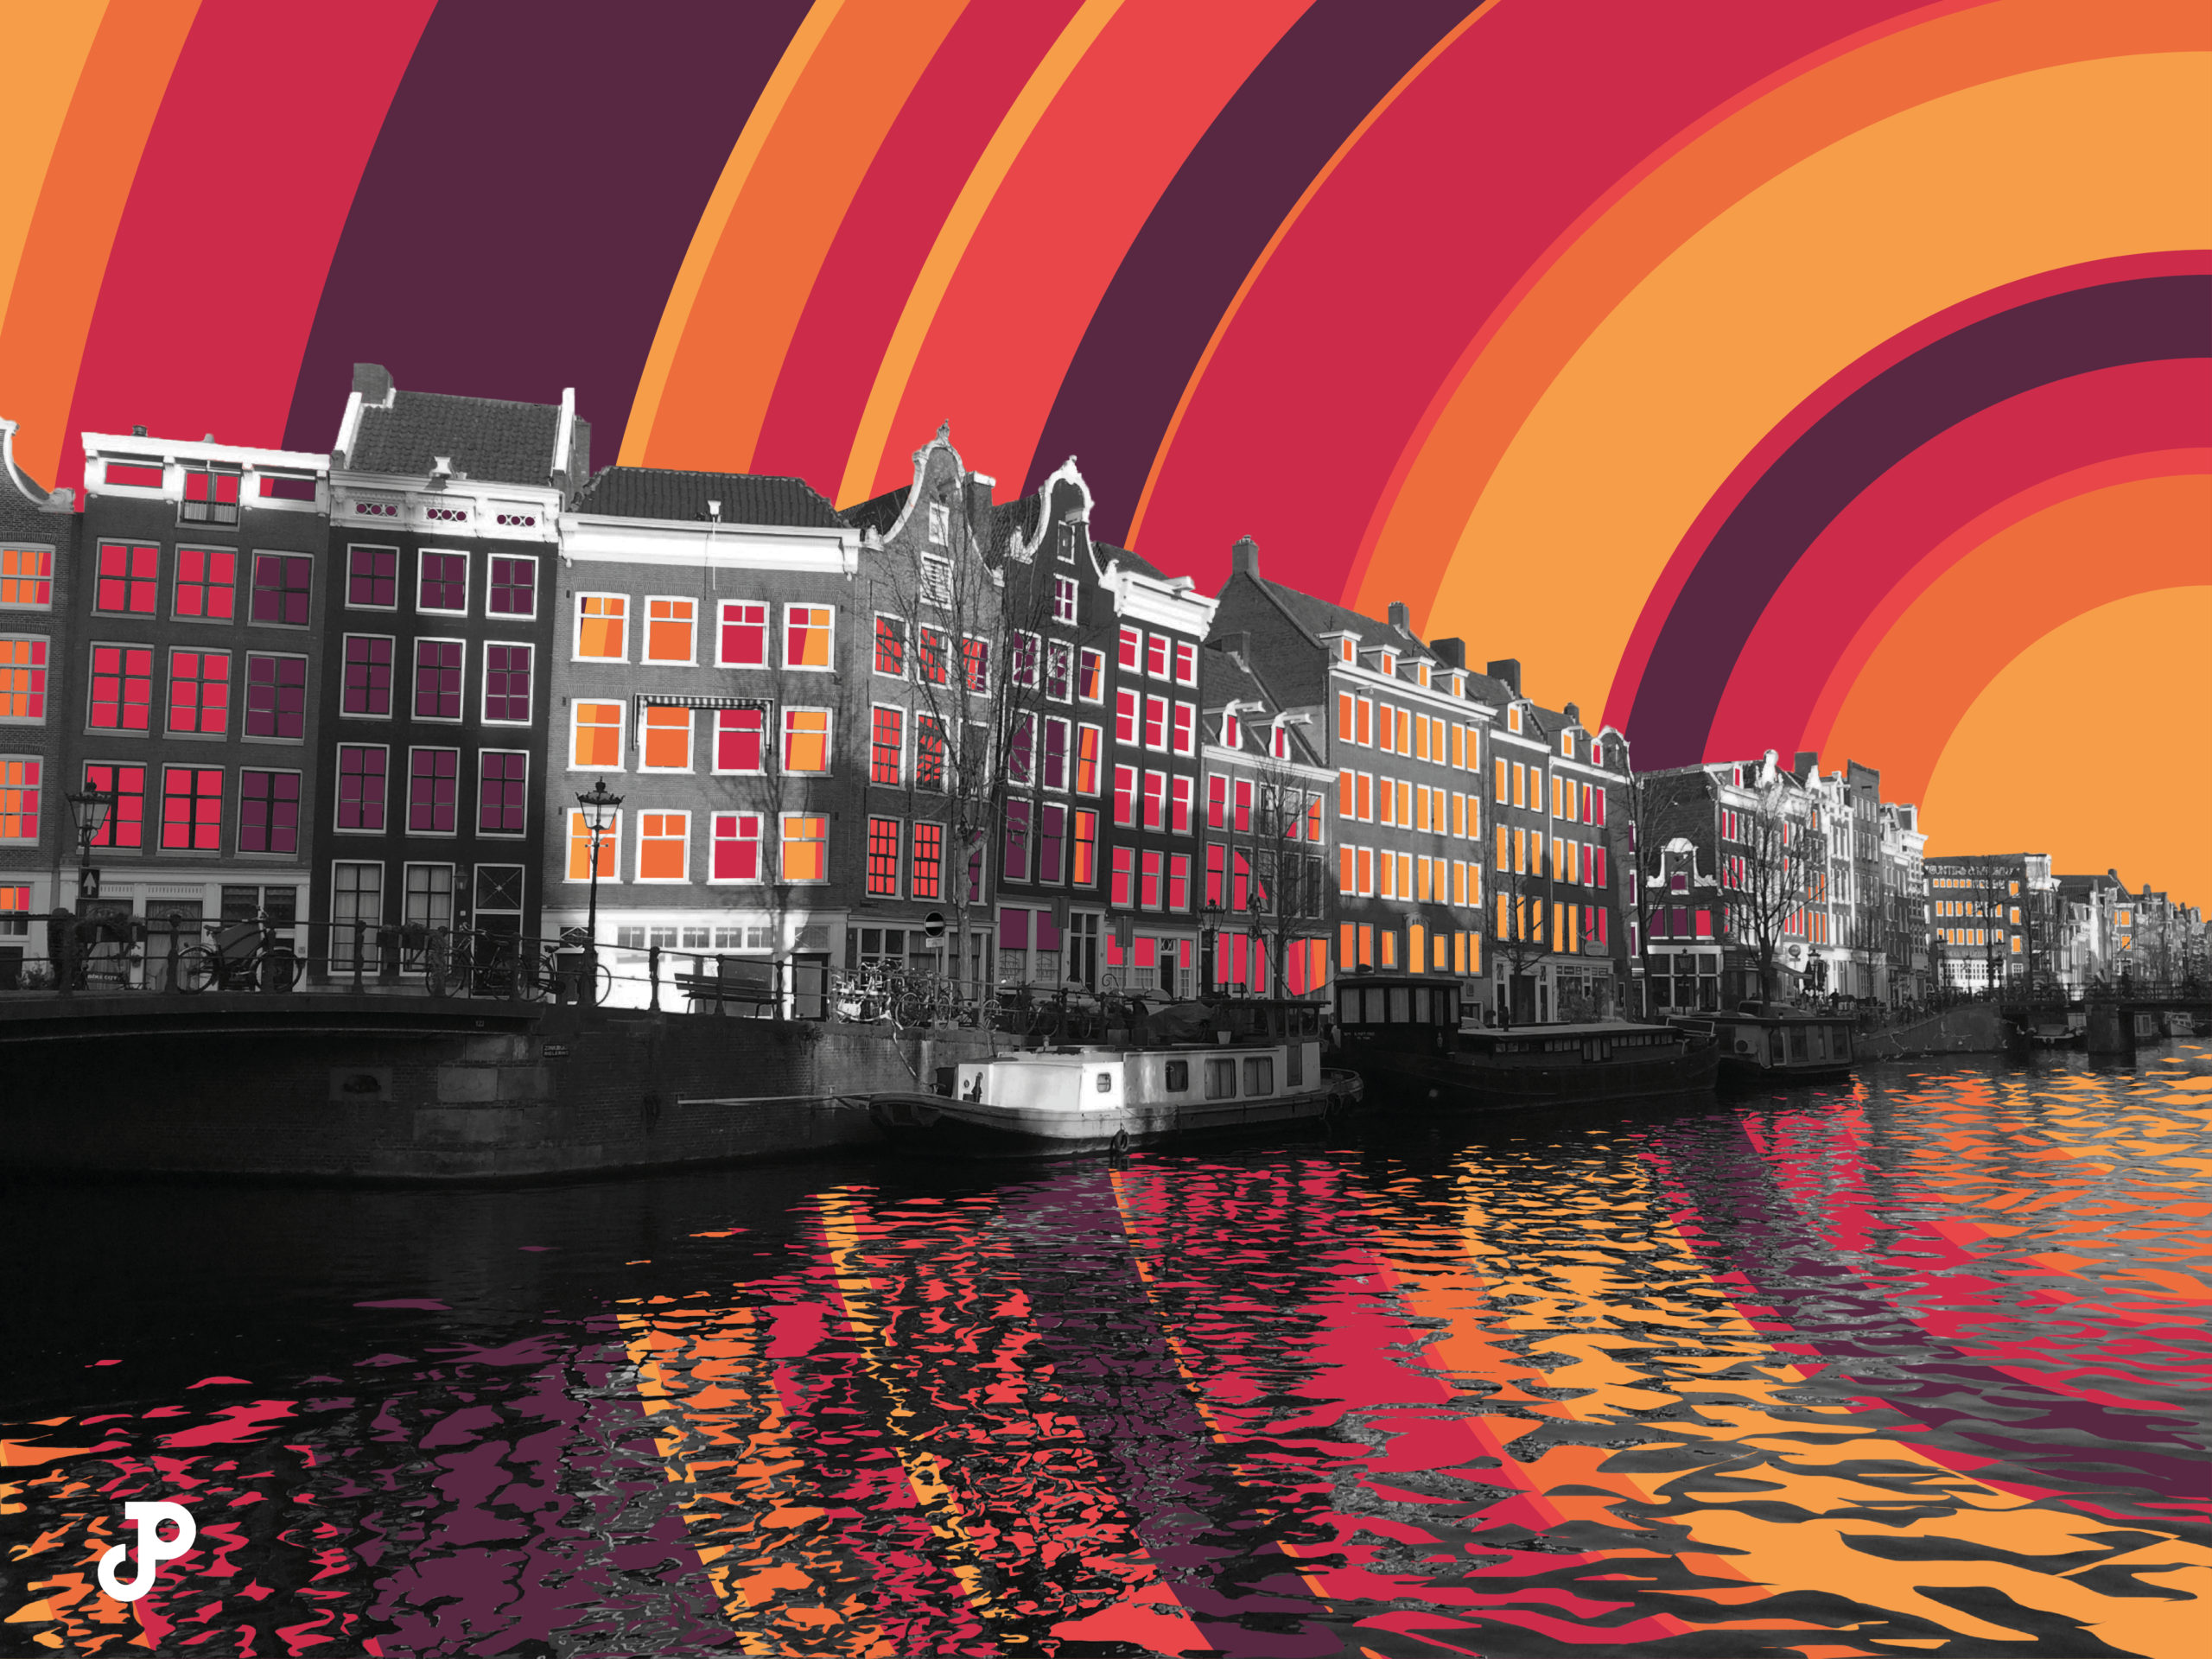 a photograph of buildings in Amsterdam with a colorful pop-art design of concentric circles replacing the sky